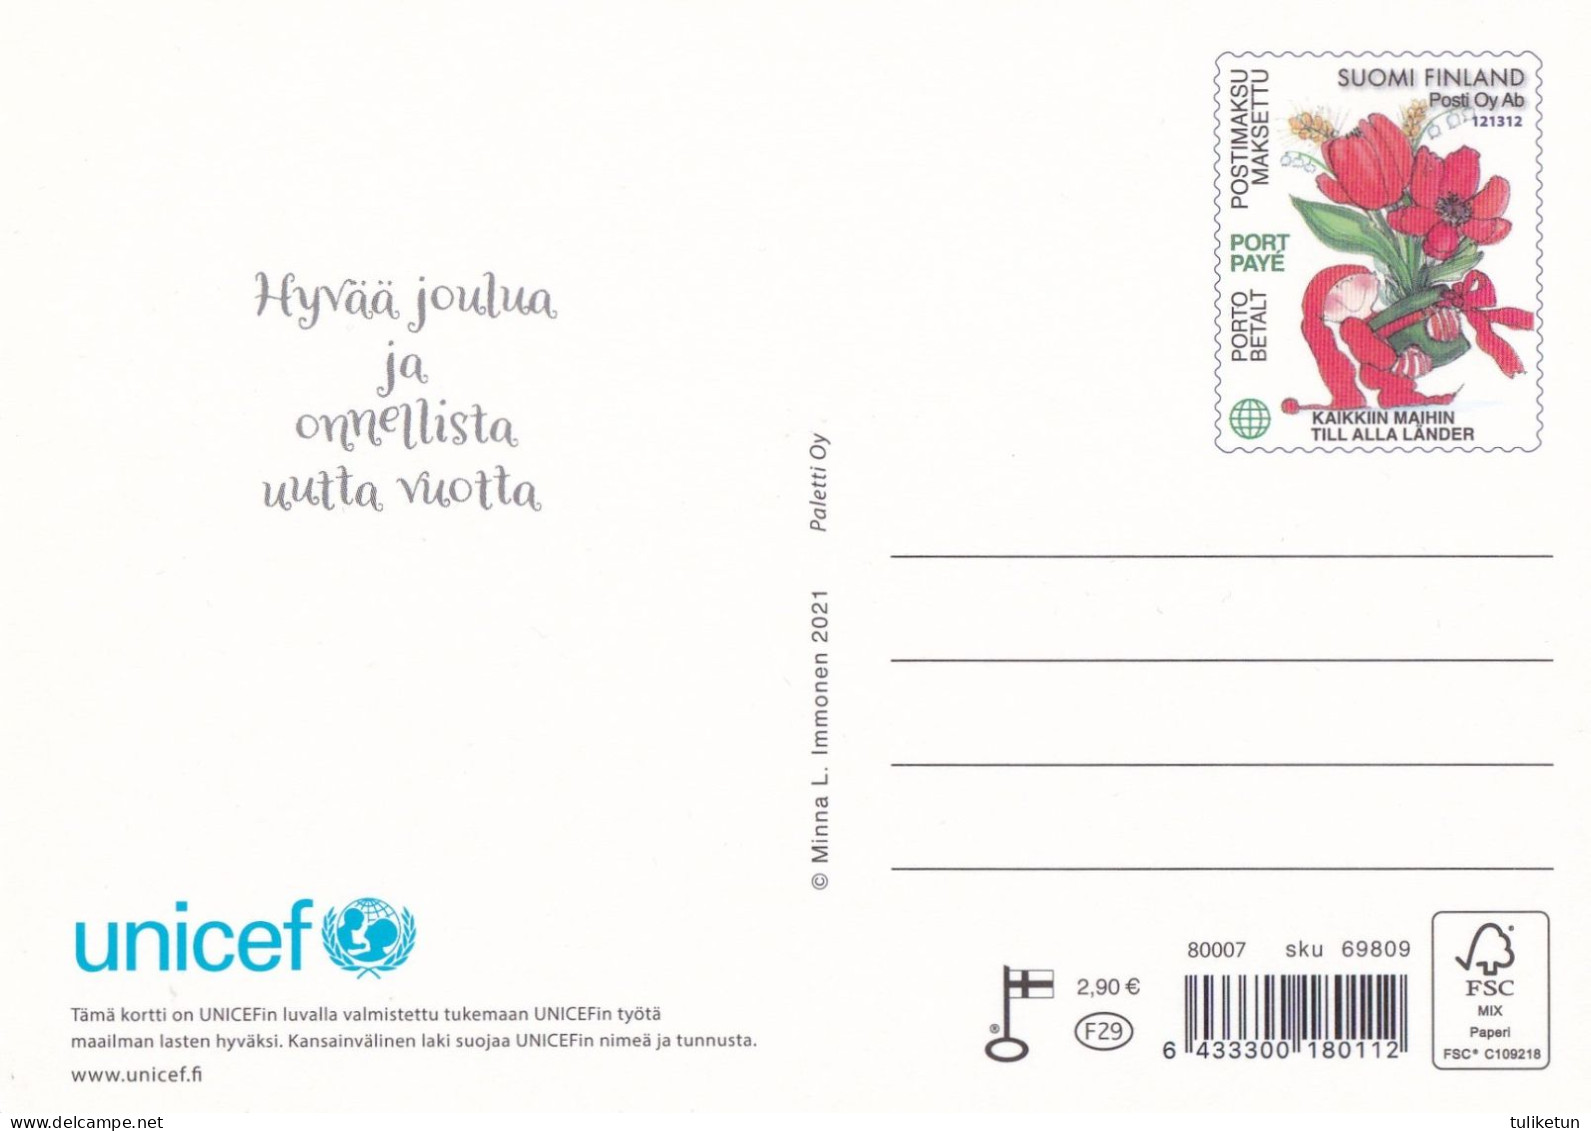 Postal Stationery - Elves - Brownies Holding Candle Lanterns - Unicef 2021 - Suomi Finland - Postage Paid - Postal Stationery